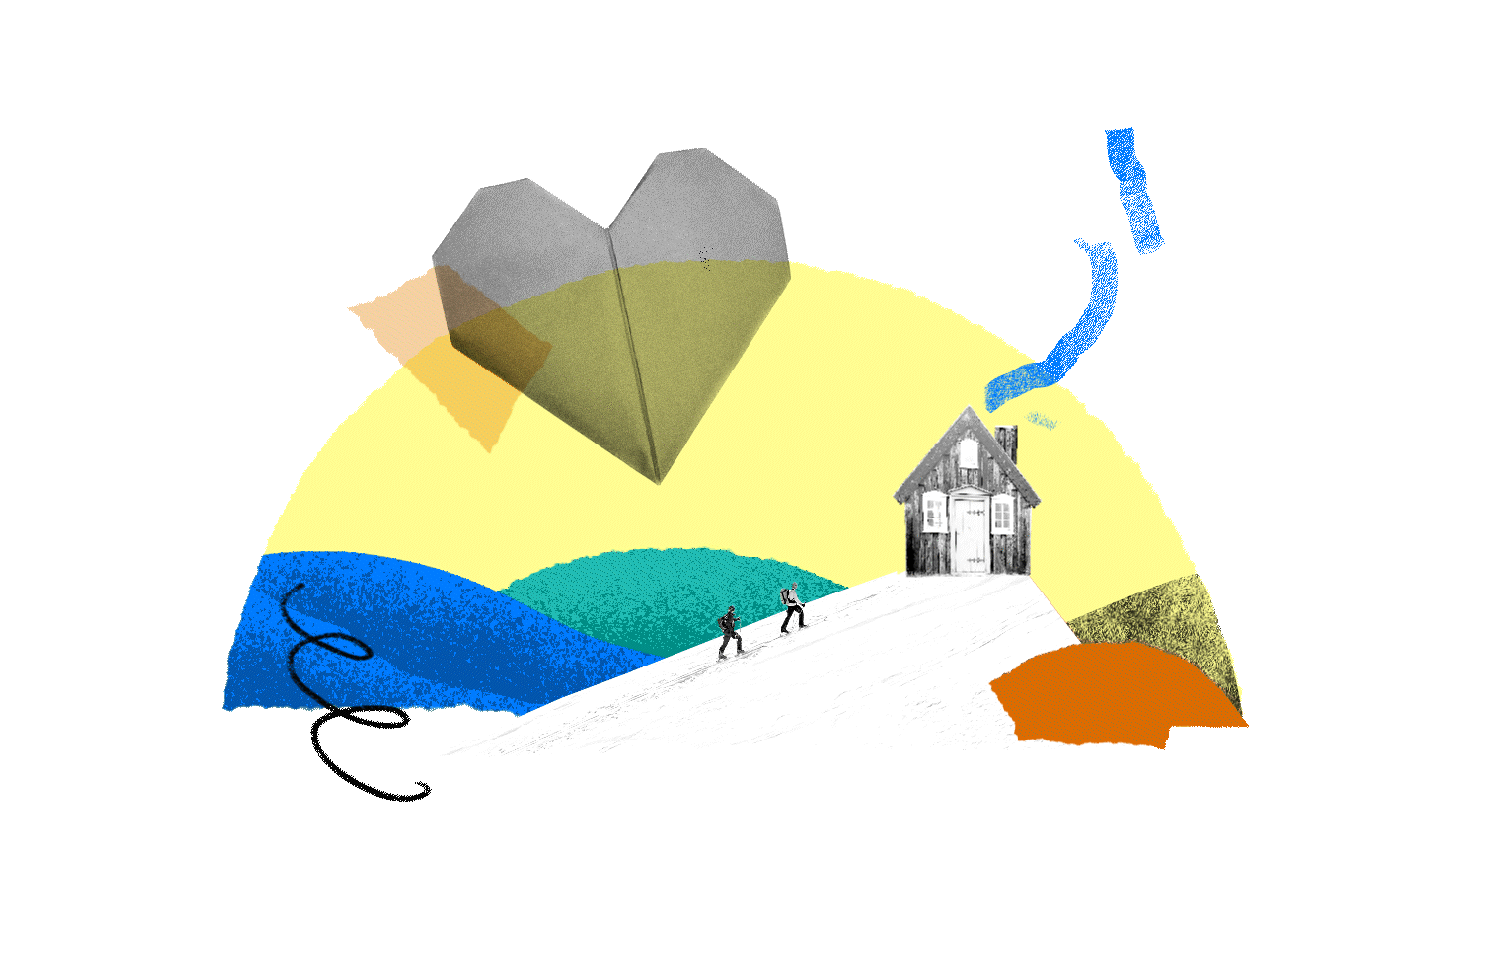 Animated graphic featuring a heart shape with a fingerprint and two people hiking to a building atop a summit